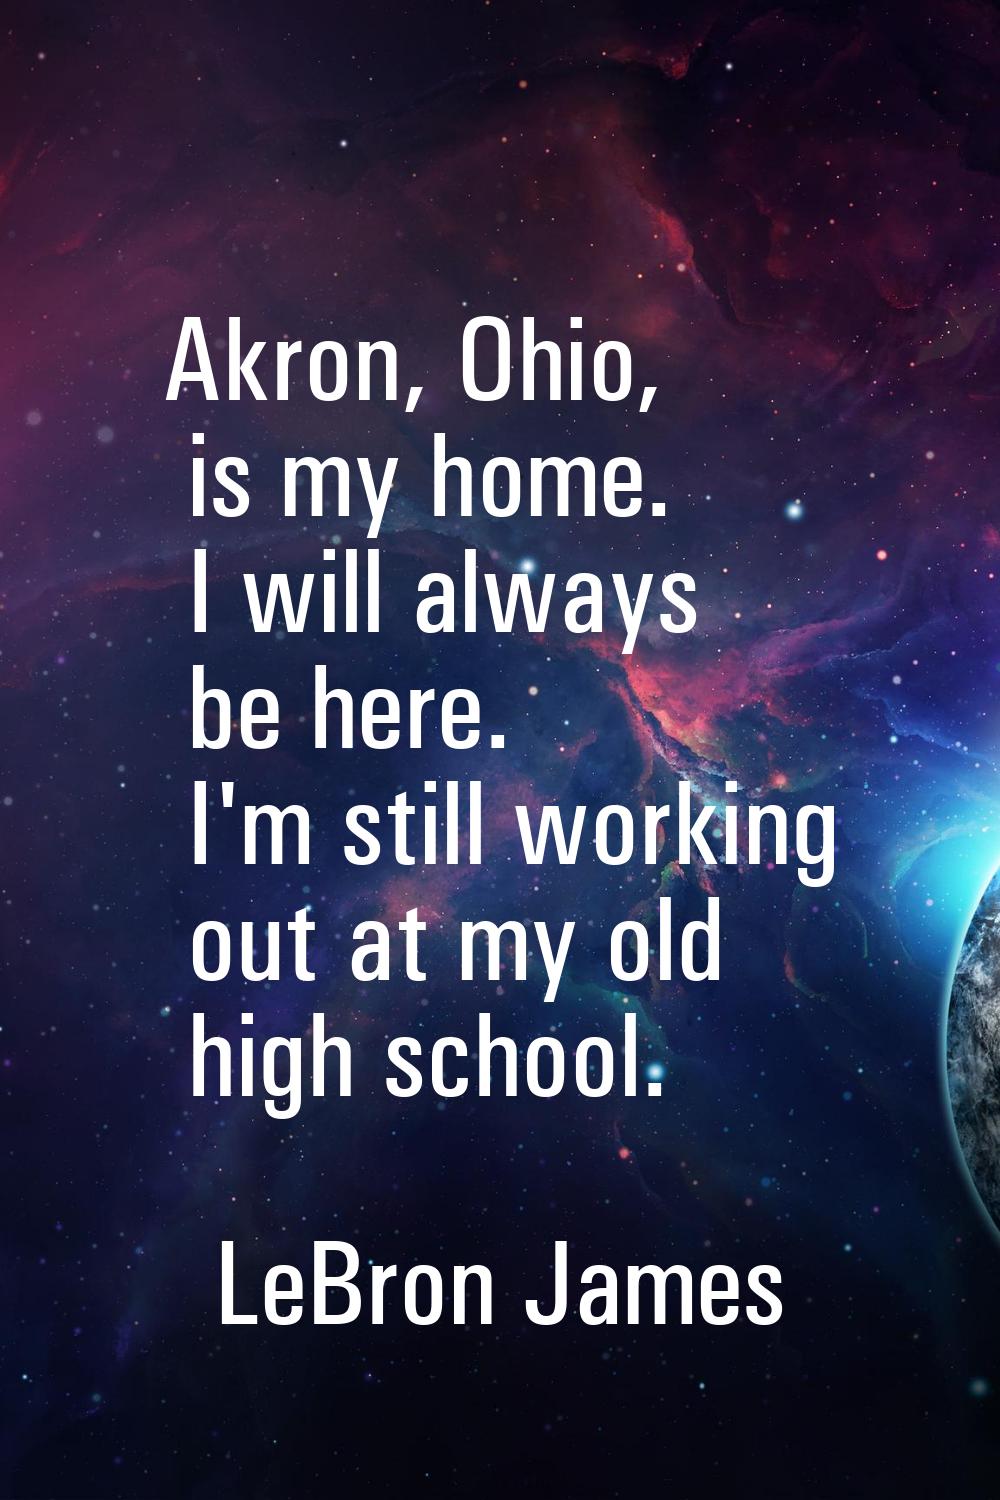 Akron, Ohio, is my home. I will always be here. I'm still working out at my old high school.